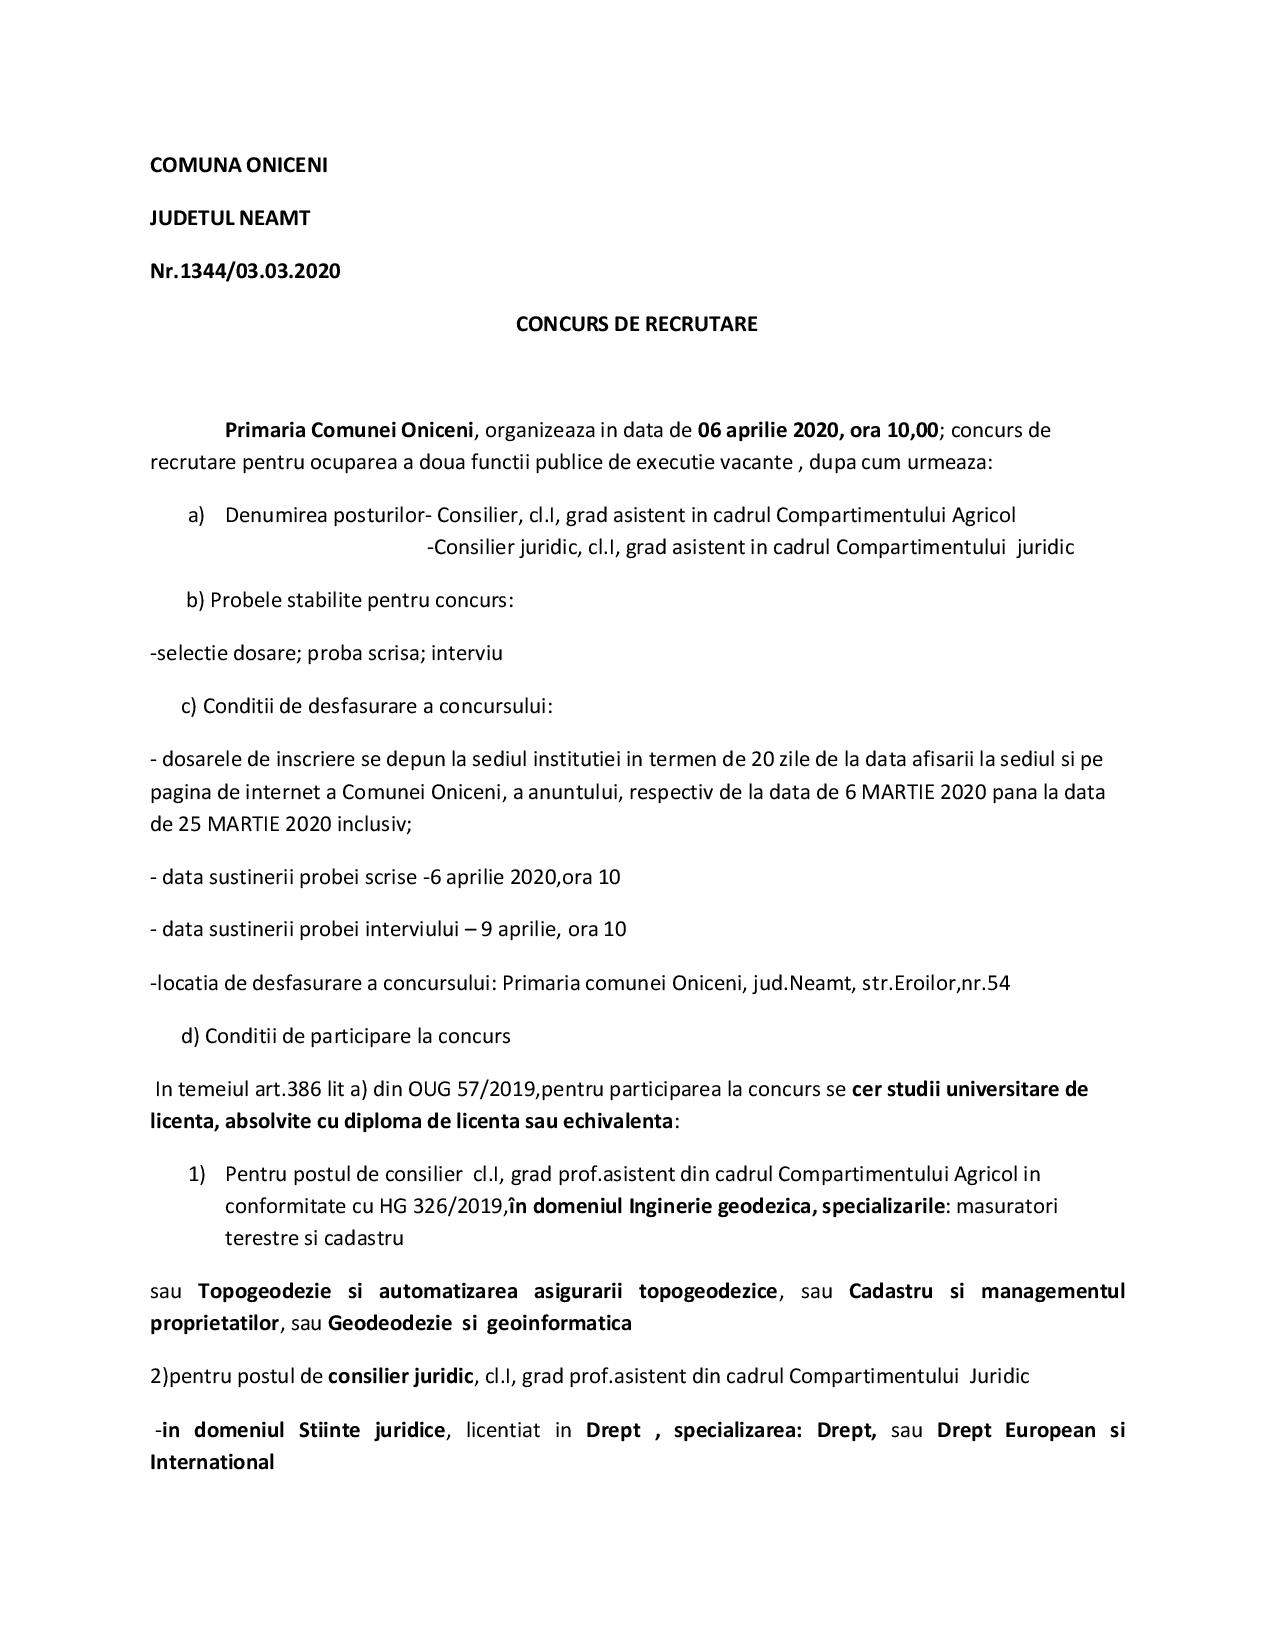 anunt-concurs-recrutare-nr-1344-din-3-03-2020-page-001